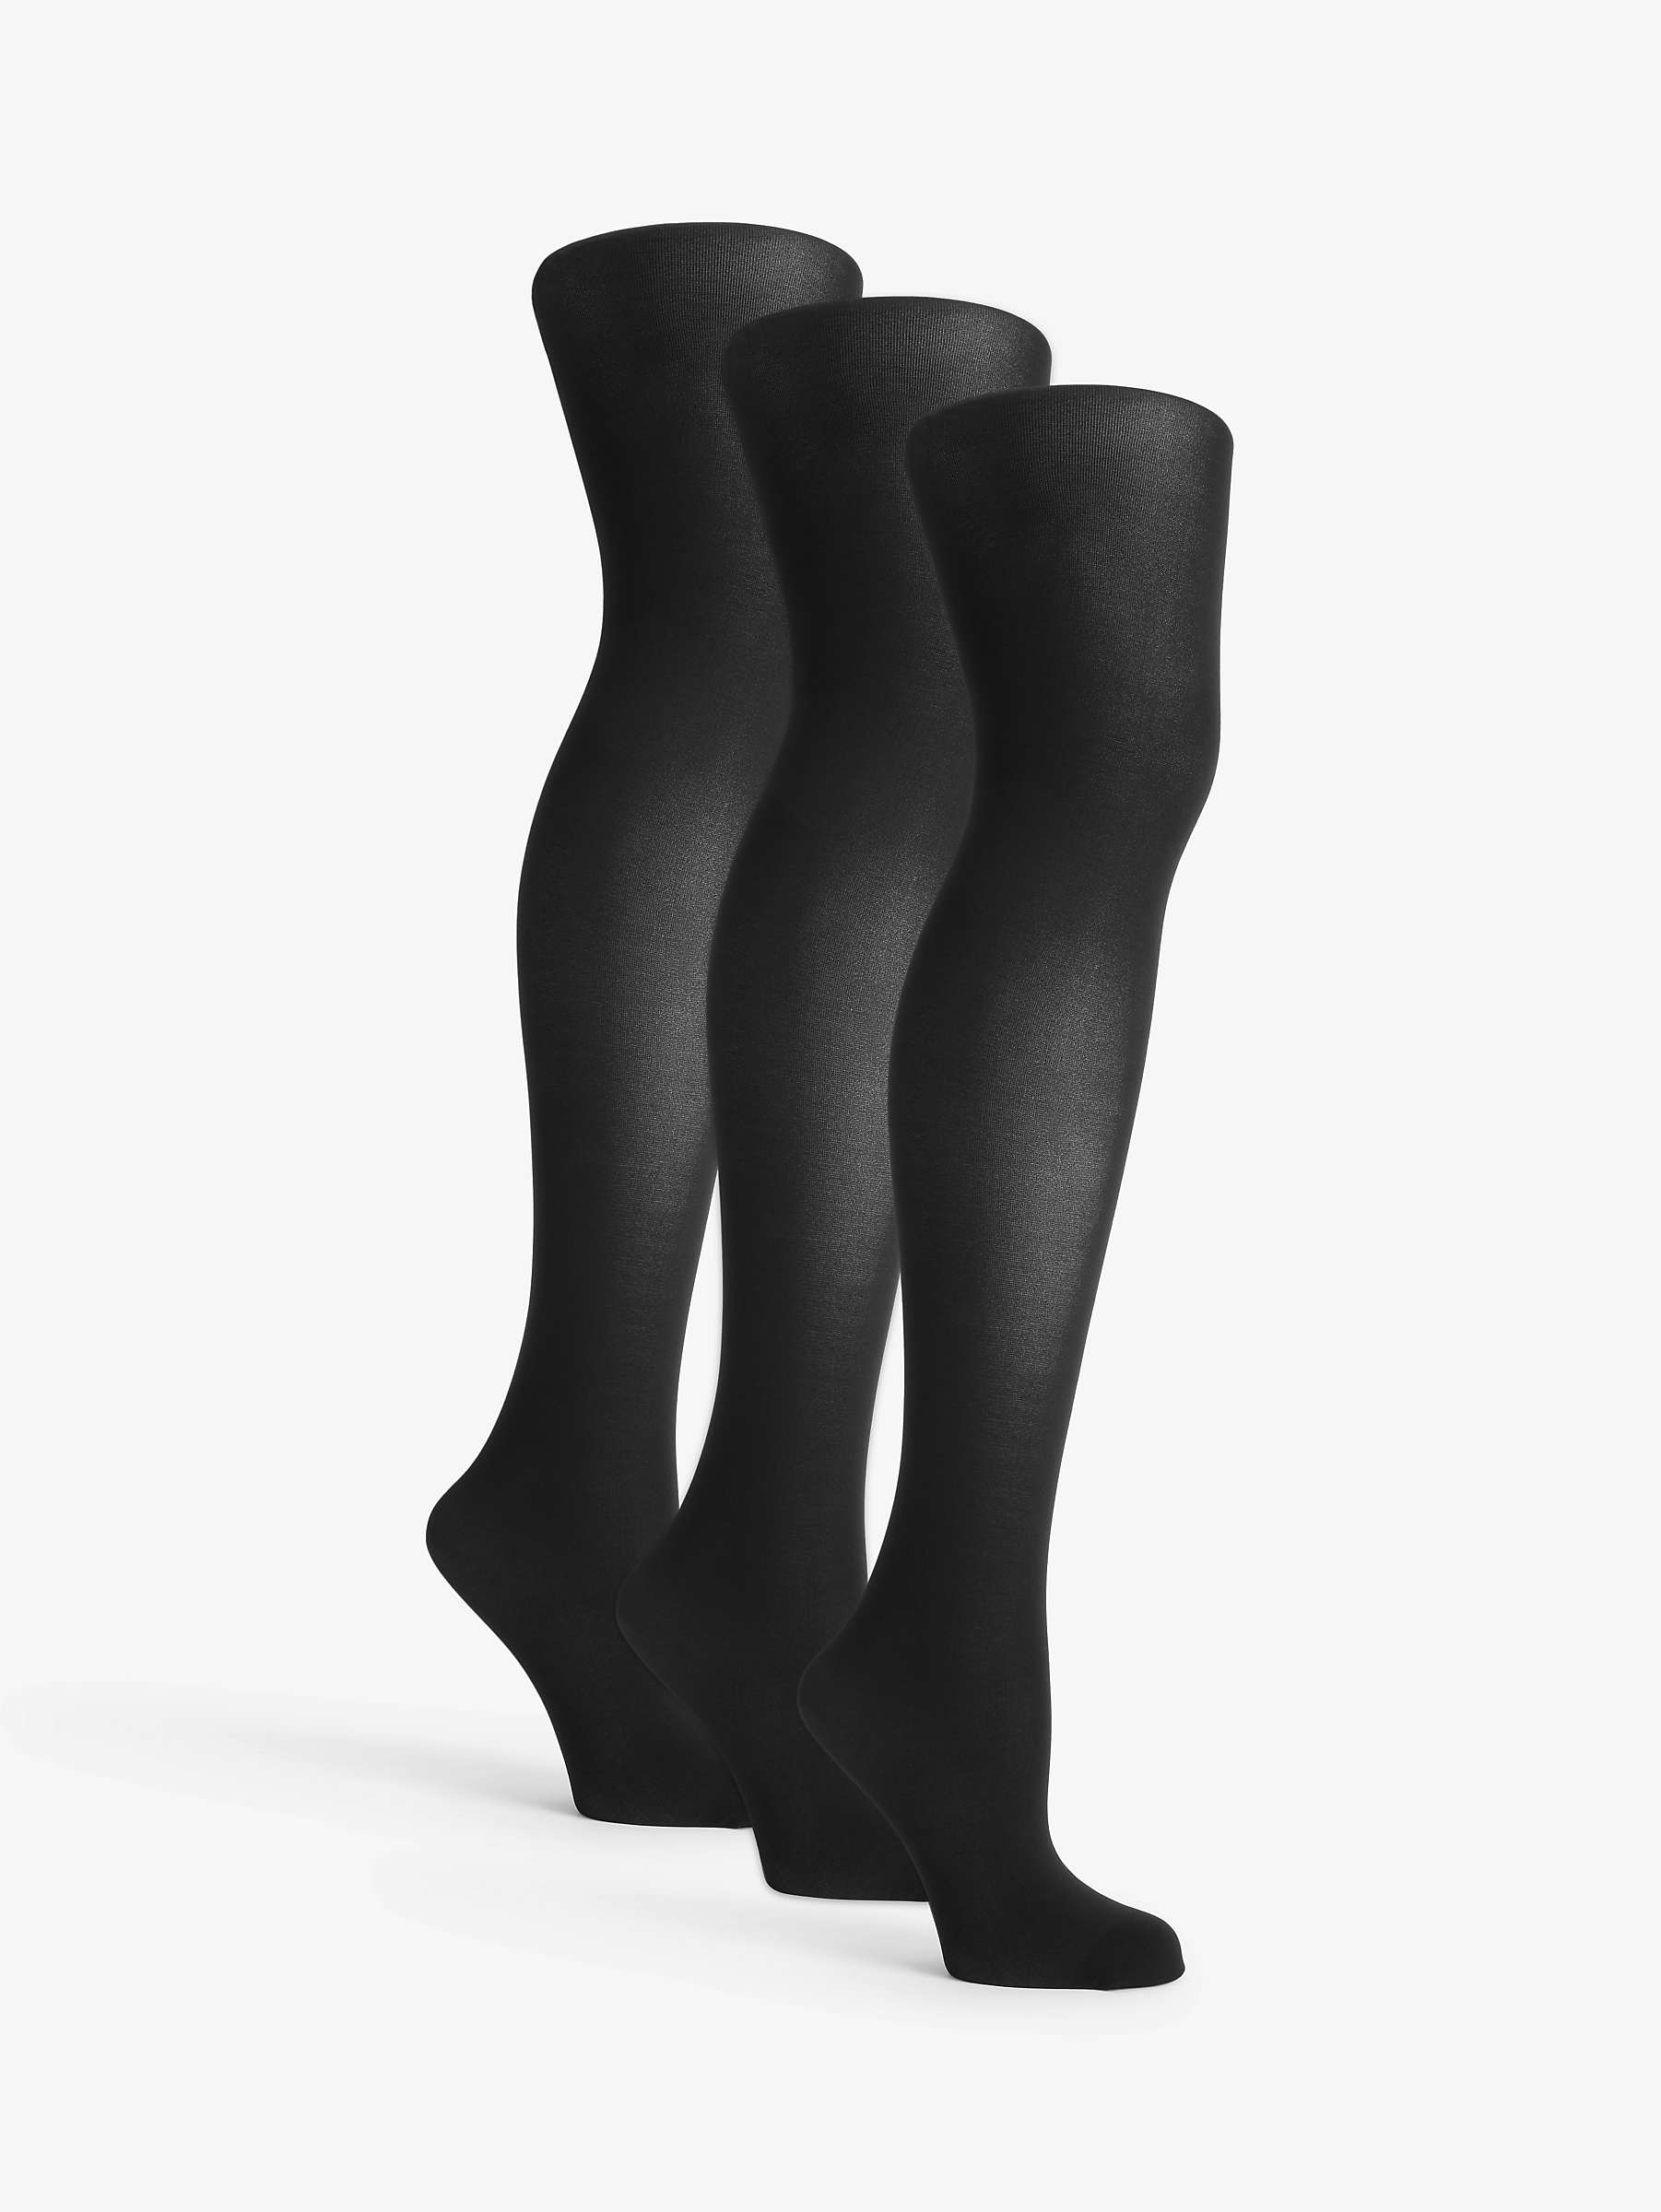 Buy John Lewis ANYDAY 40 Denier Opaque Tights, Pack of 3 Online at johnlewis.com